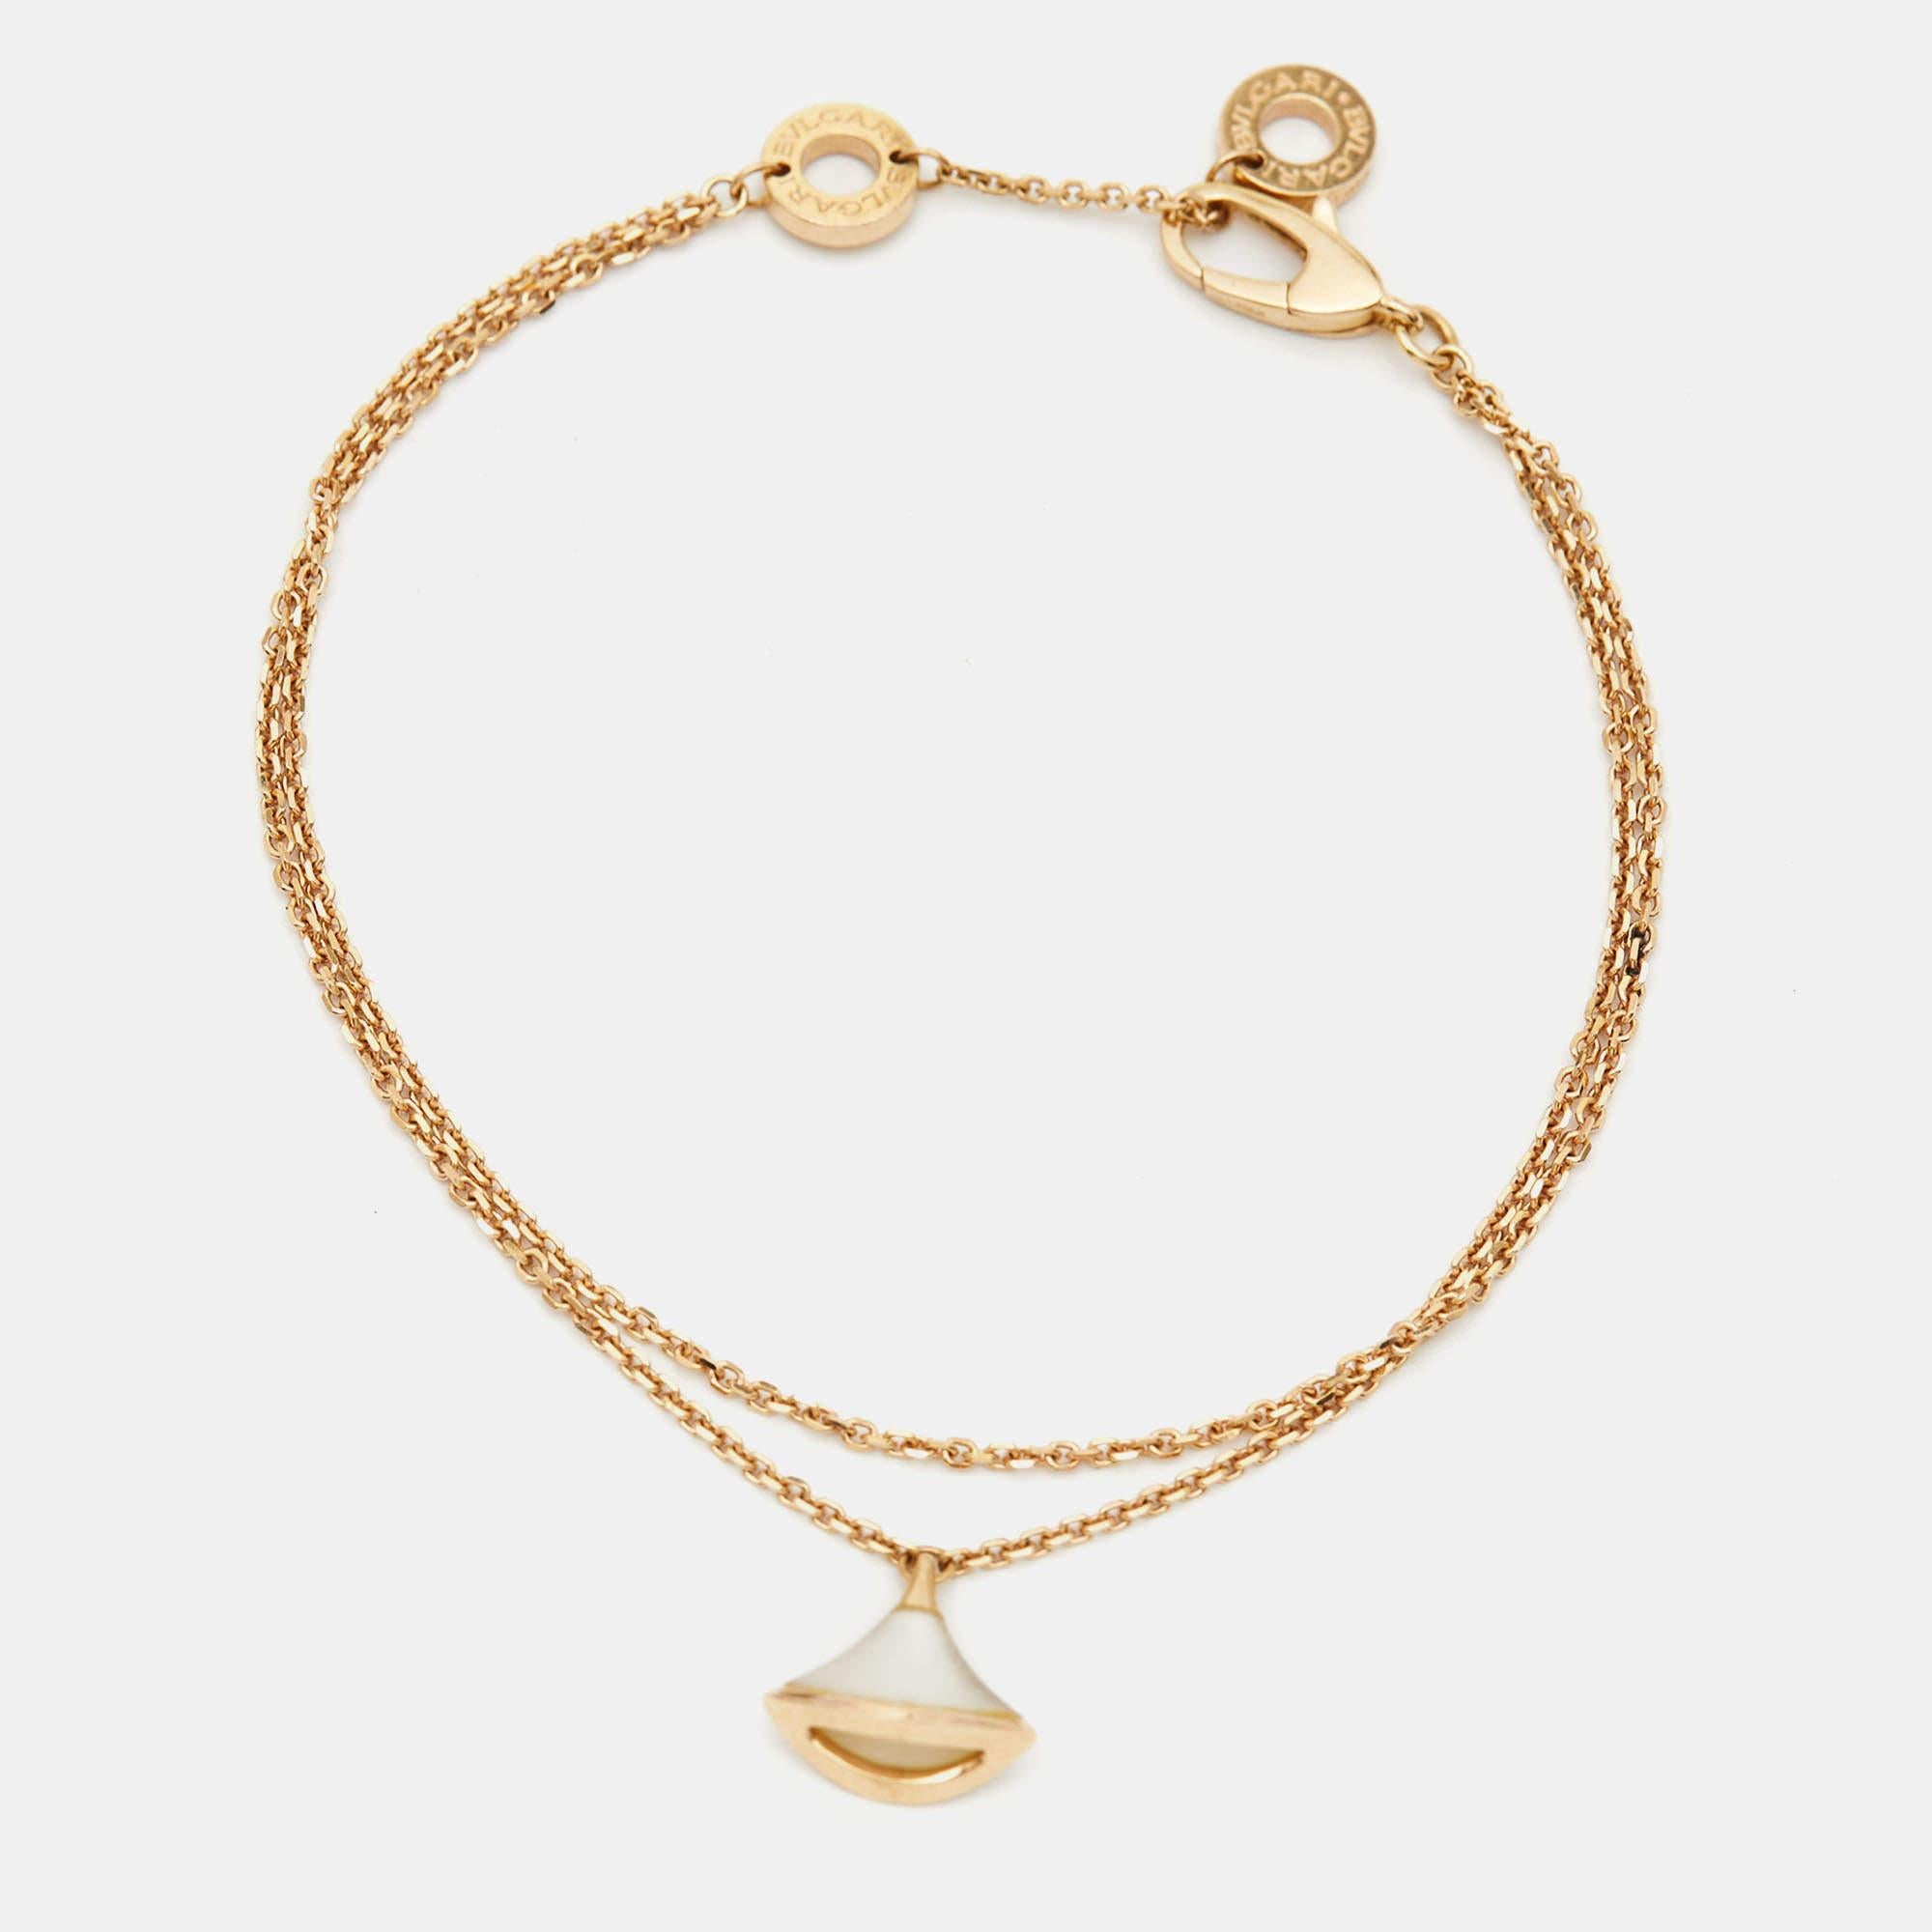 The grandeur of Italian beauty is reflected in this bracelet from Bvlgari's Divas' Dream collection. The line is inspired by the fan-shaped mosaics of the Caracalla Baths in Rome, a detail the brand has interpreted with mastery.

Includes: Info